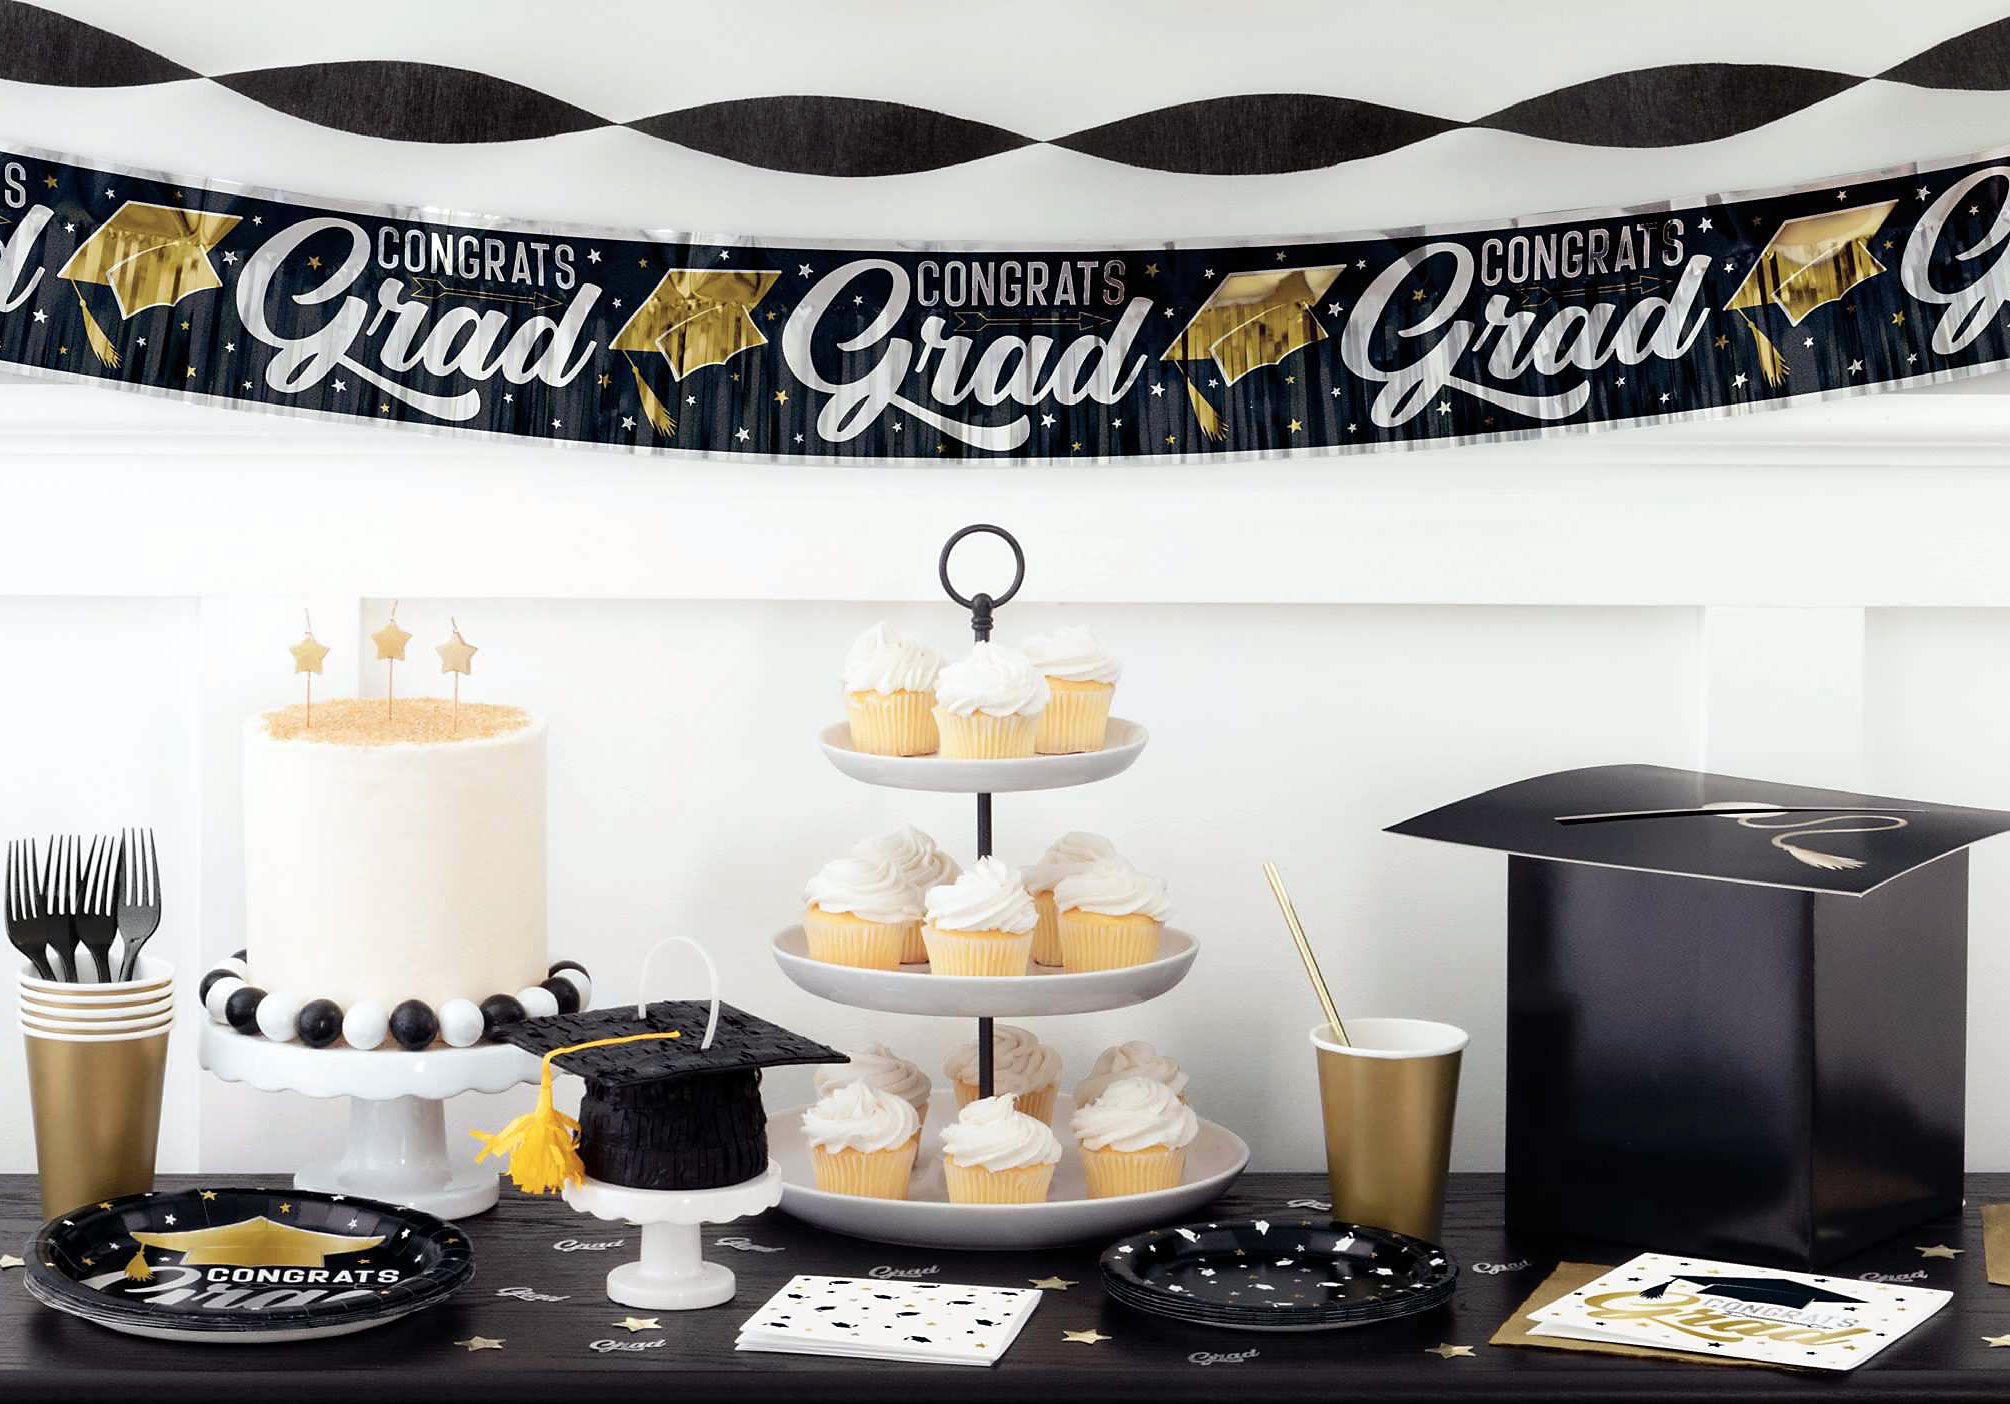 Graduation dessert table with cupcakes.